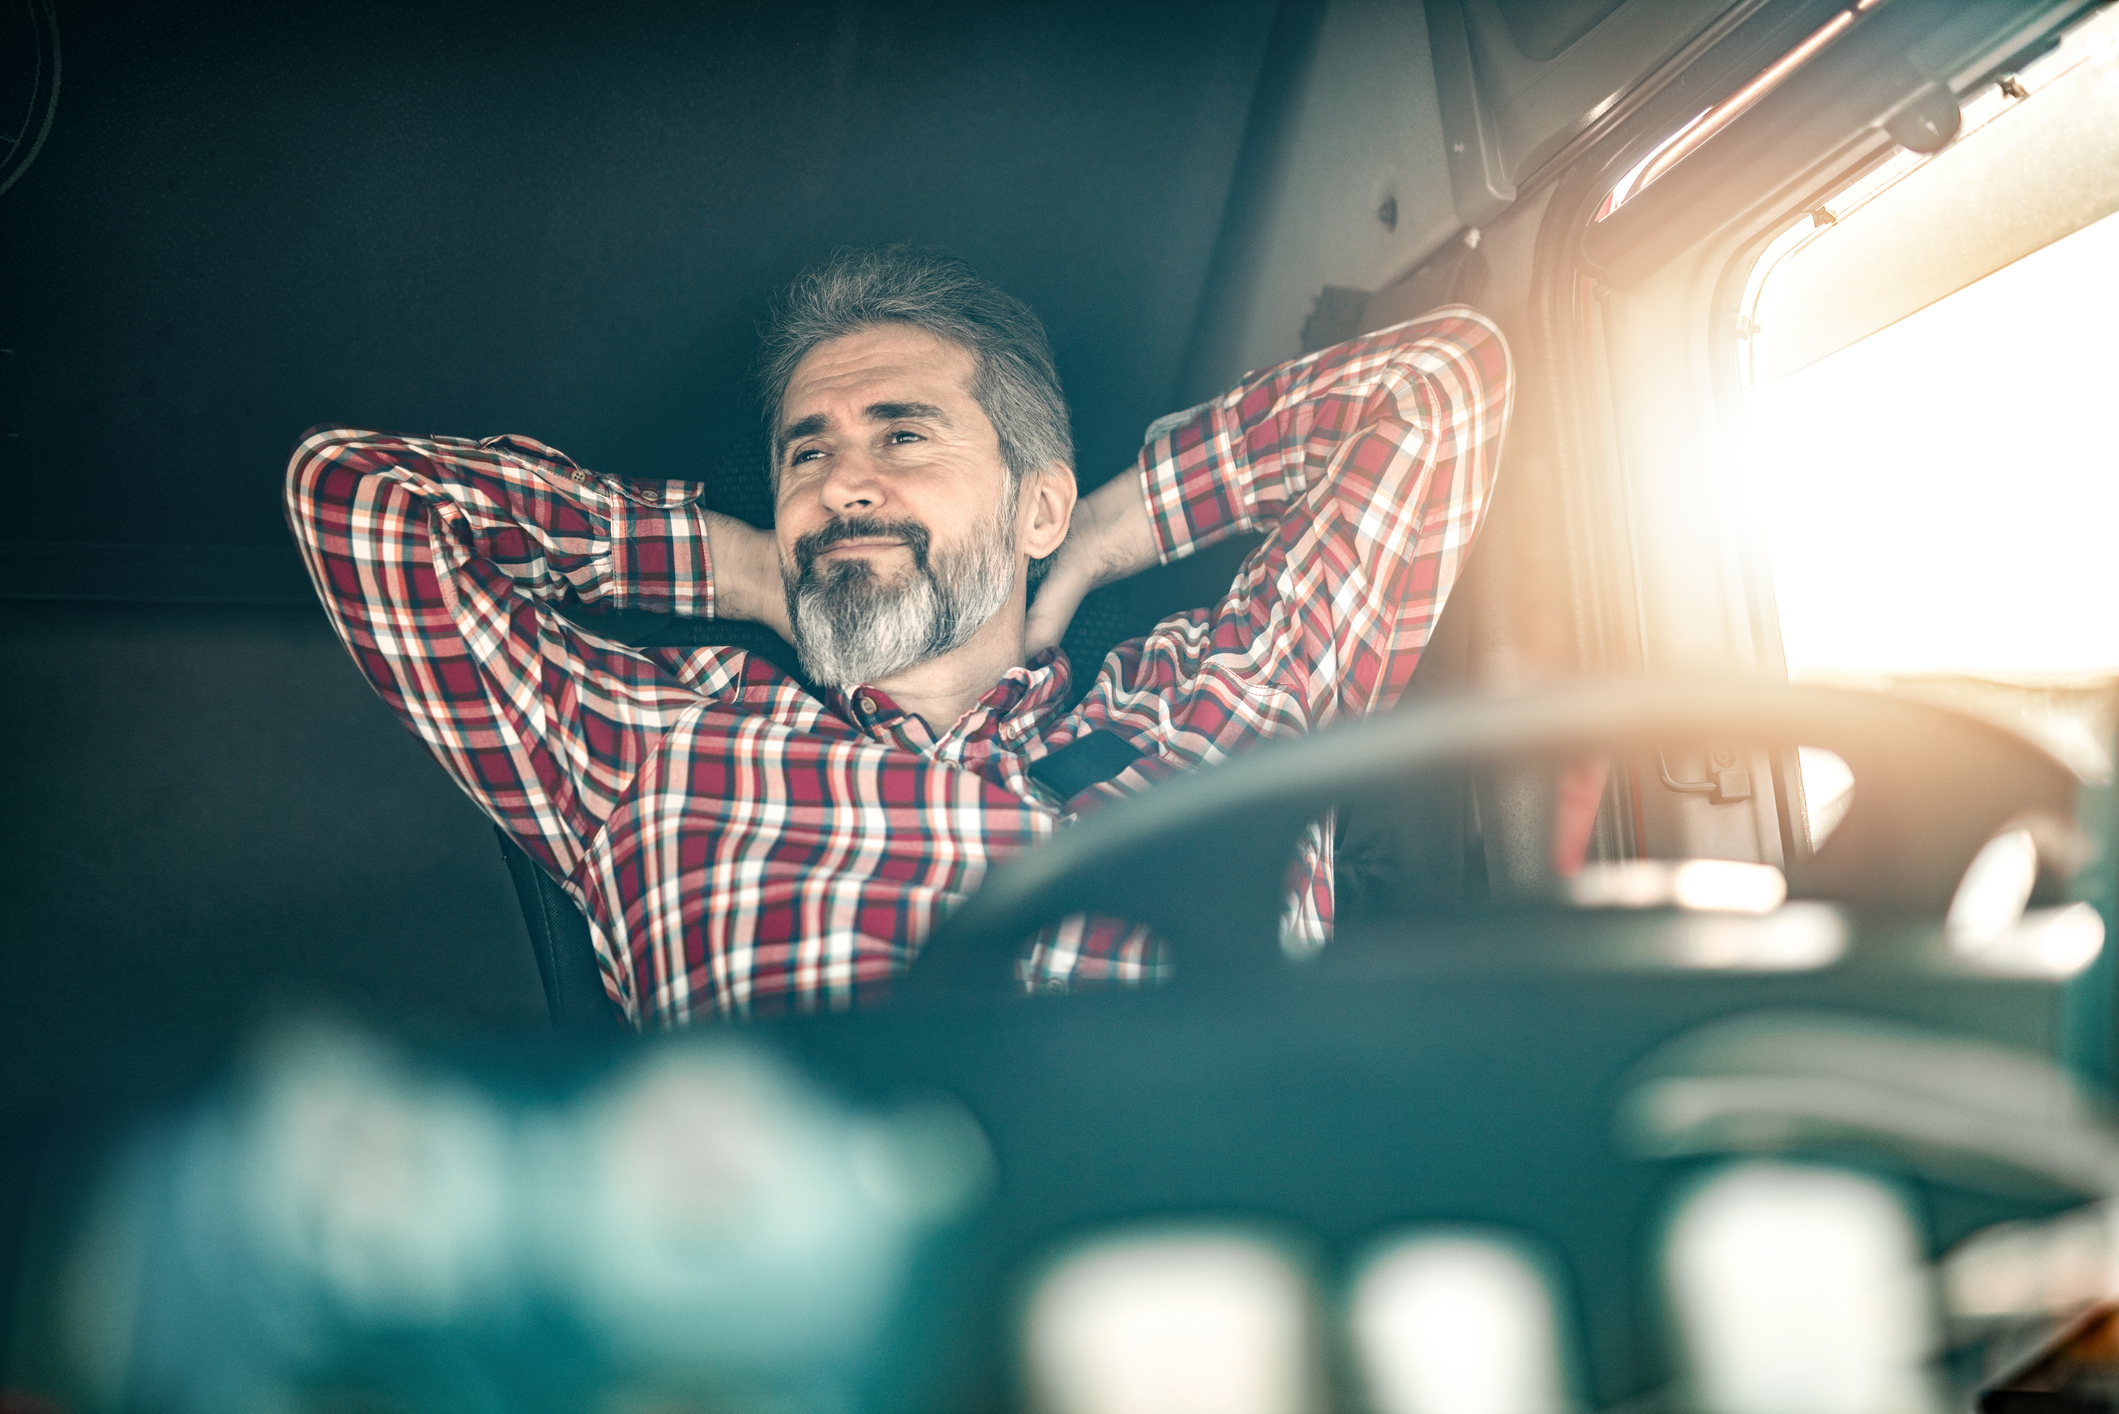 7 Trucker Essentials for a More Comfortable Ride